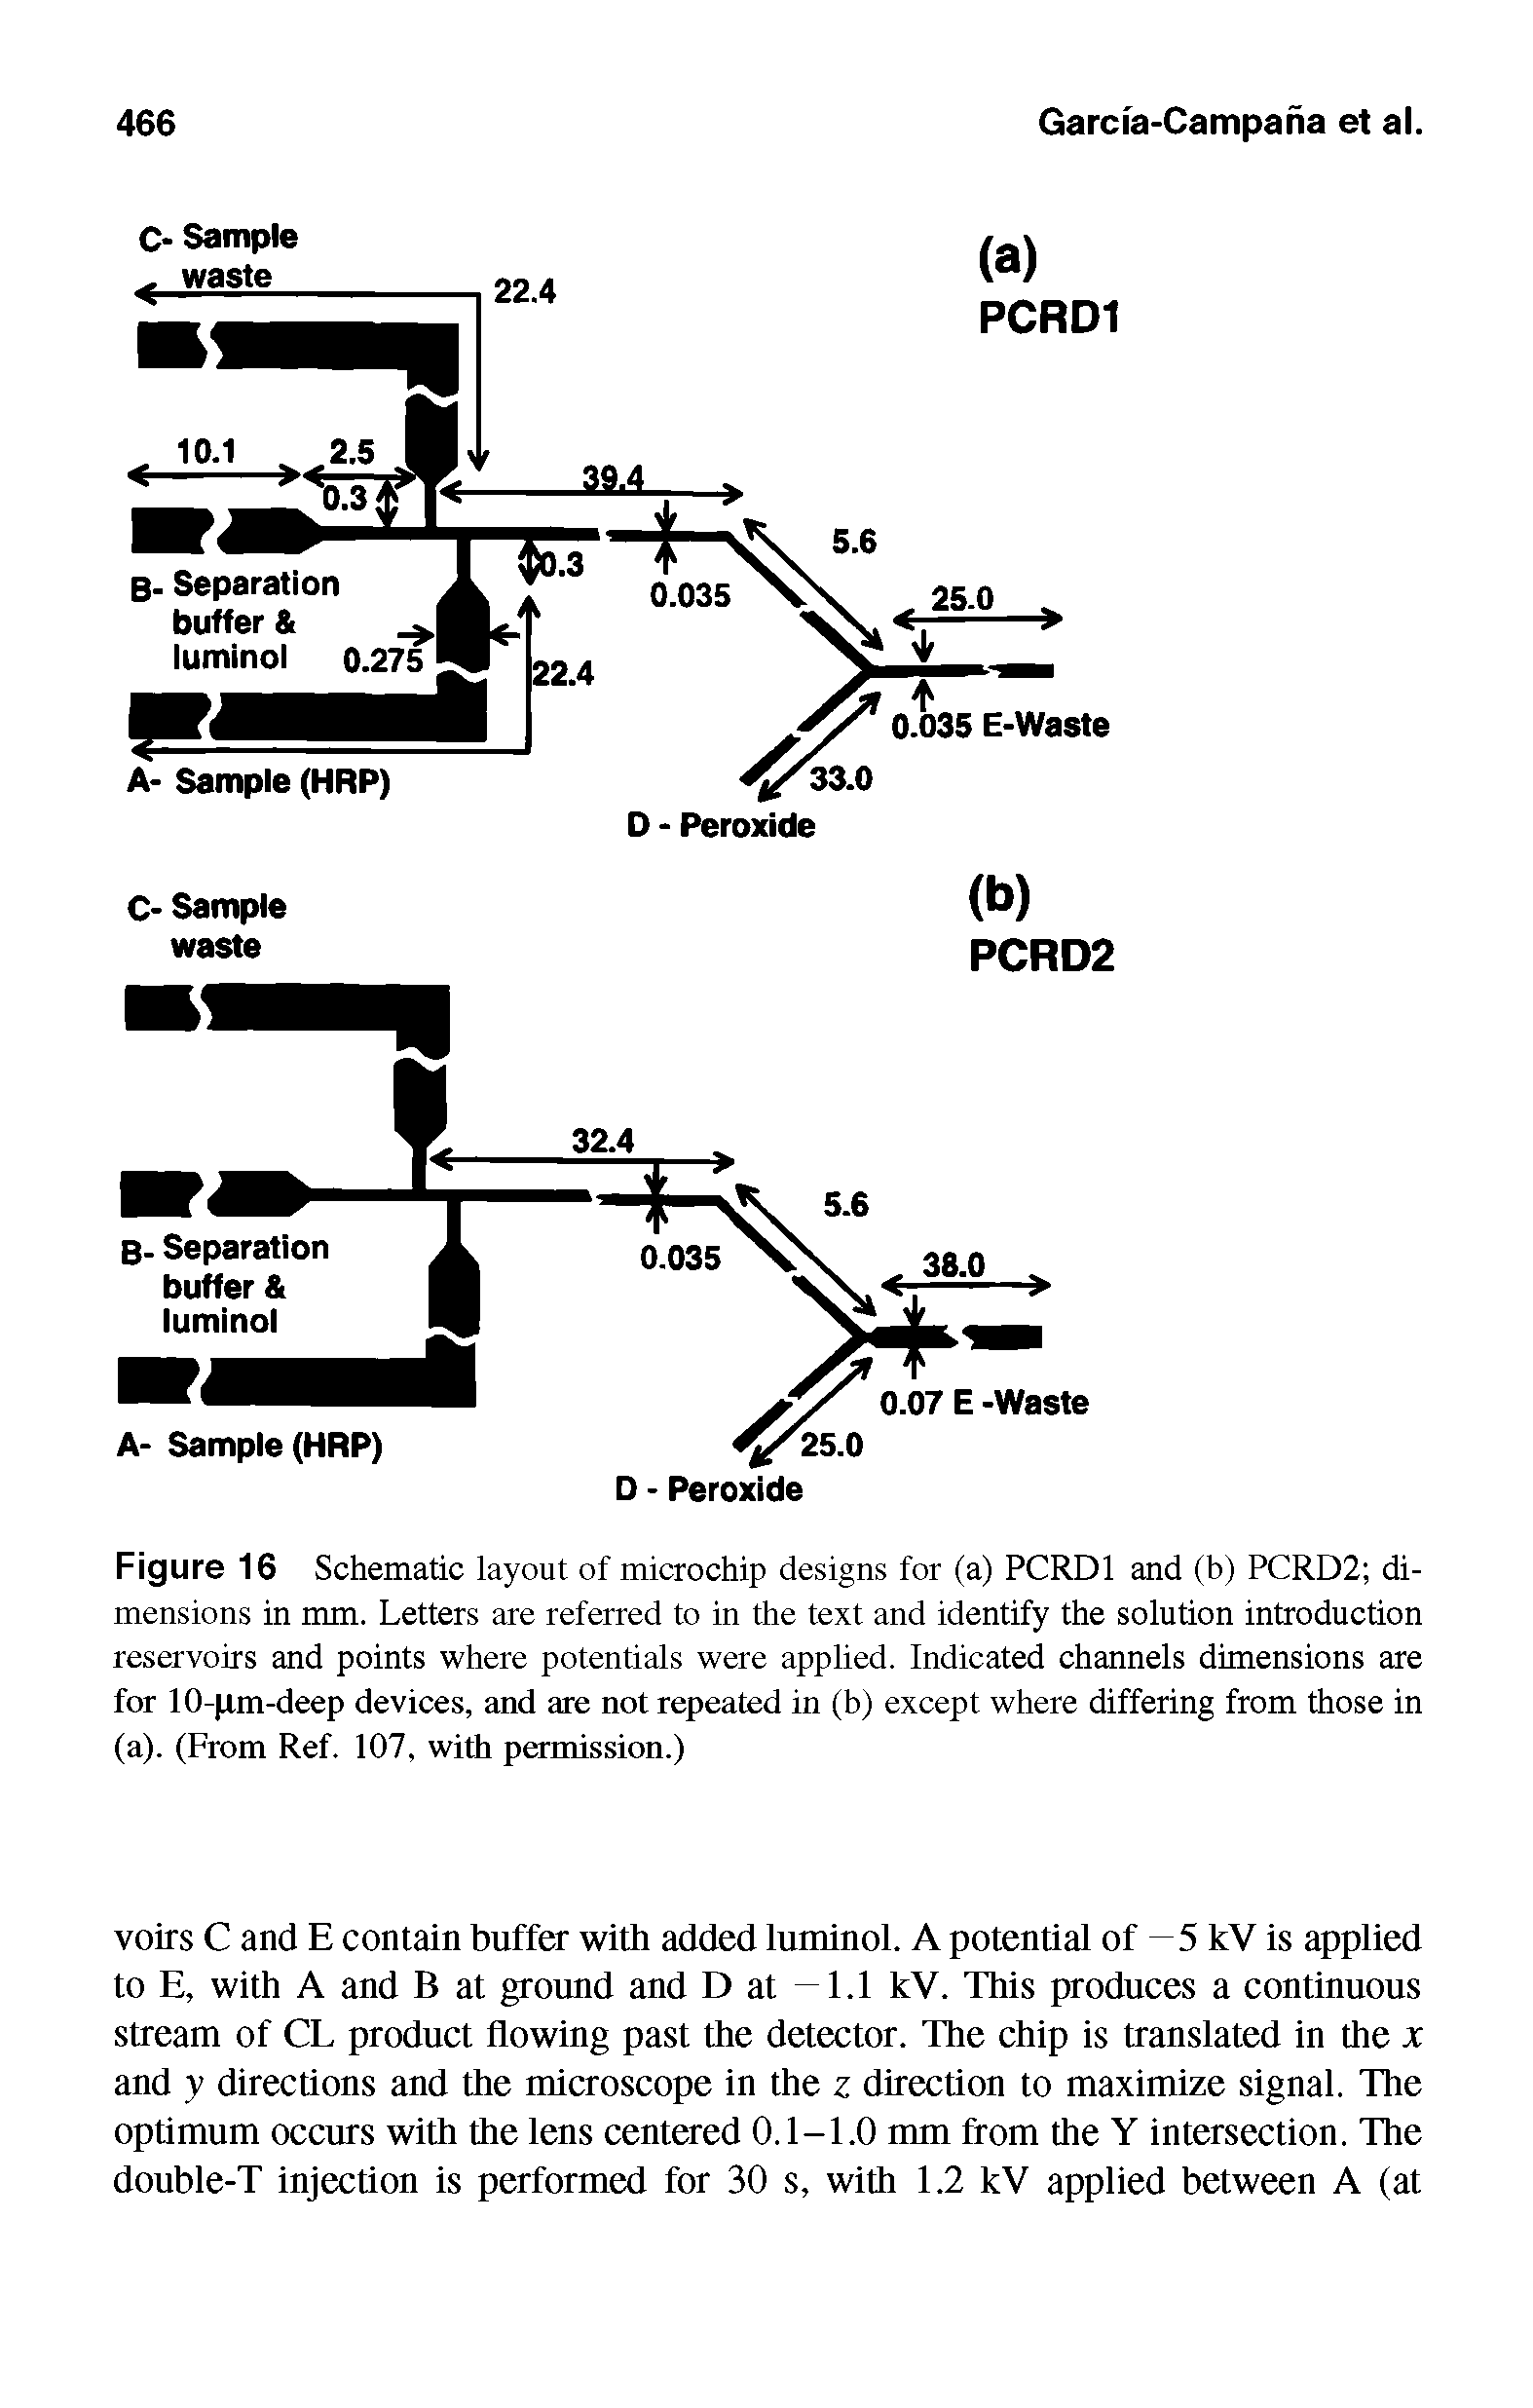 Figure 16 Schematic layout of microchip designs for (a) PCRD1 and (b) PCRD2 dimensions in mm. Letters are referred to in the text and identify the solution introduction reservoirs and points where potentials were applied. Indicated channels dimensions are for 10-pm-deep devices, and are not repeated in (b) except where differing from those in (a). (From Ref. 107, with permission.)...